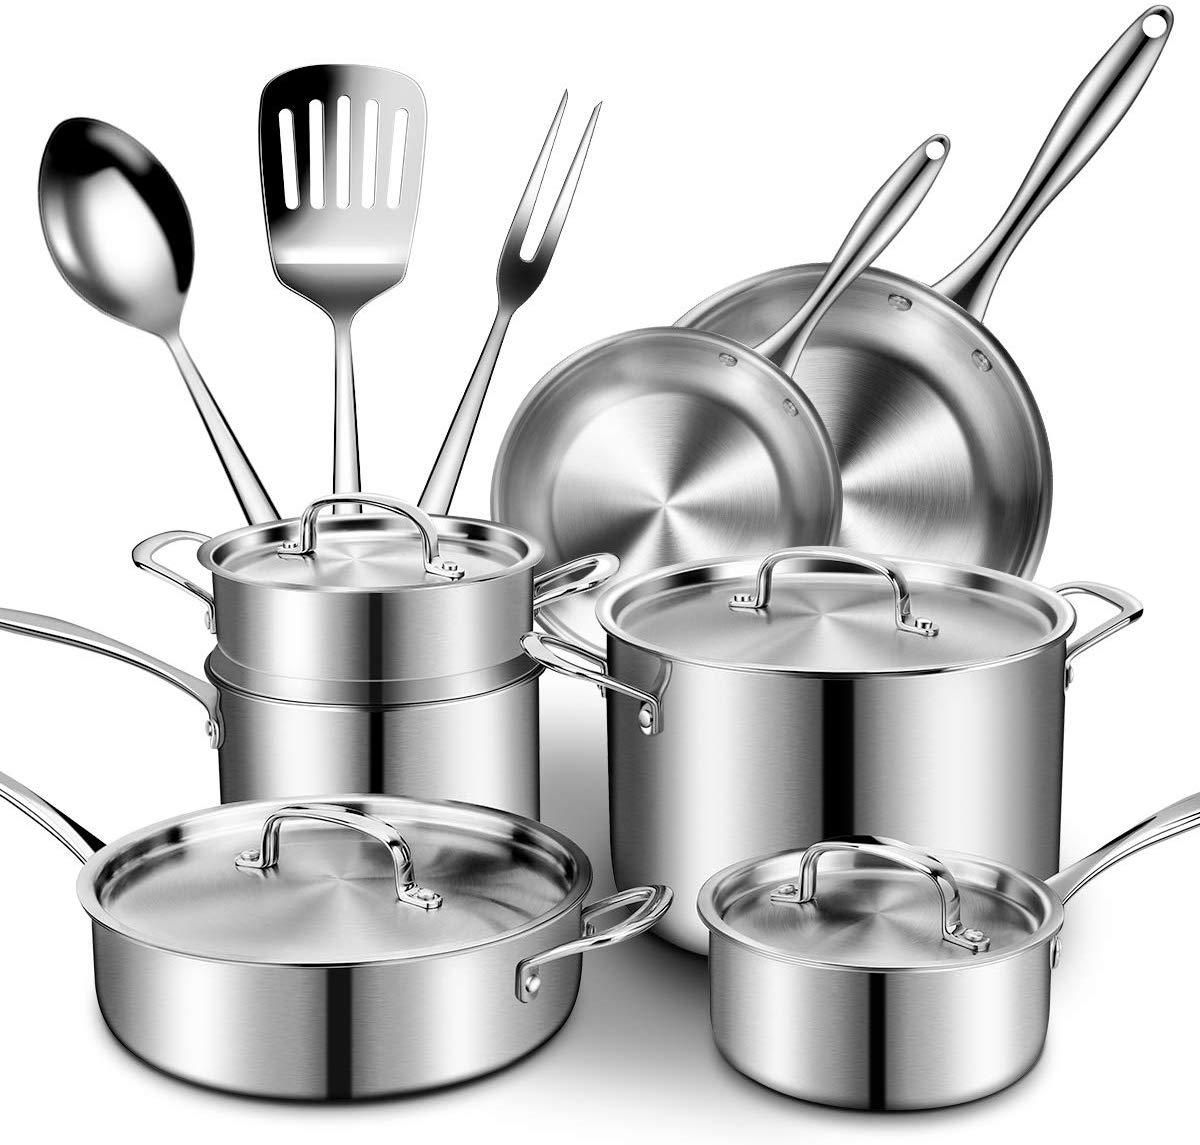 Stainless Steel Cookware Set With Sauce Pan And Stock Pots With Lids 